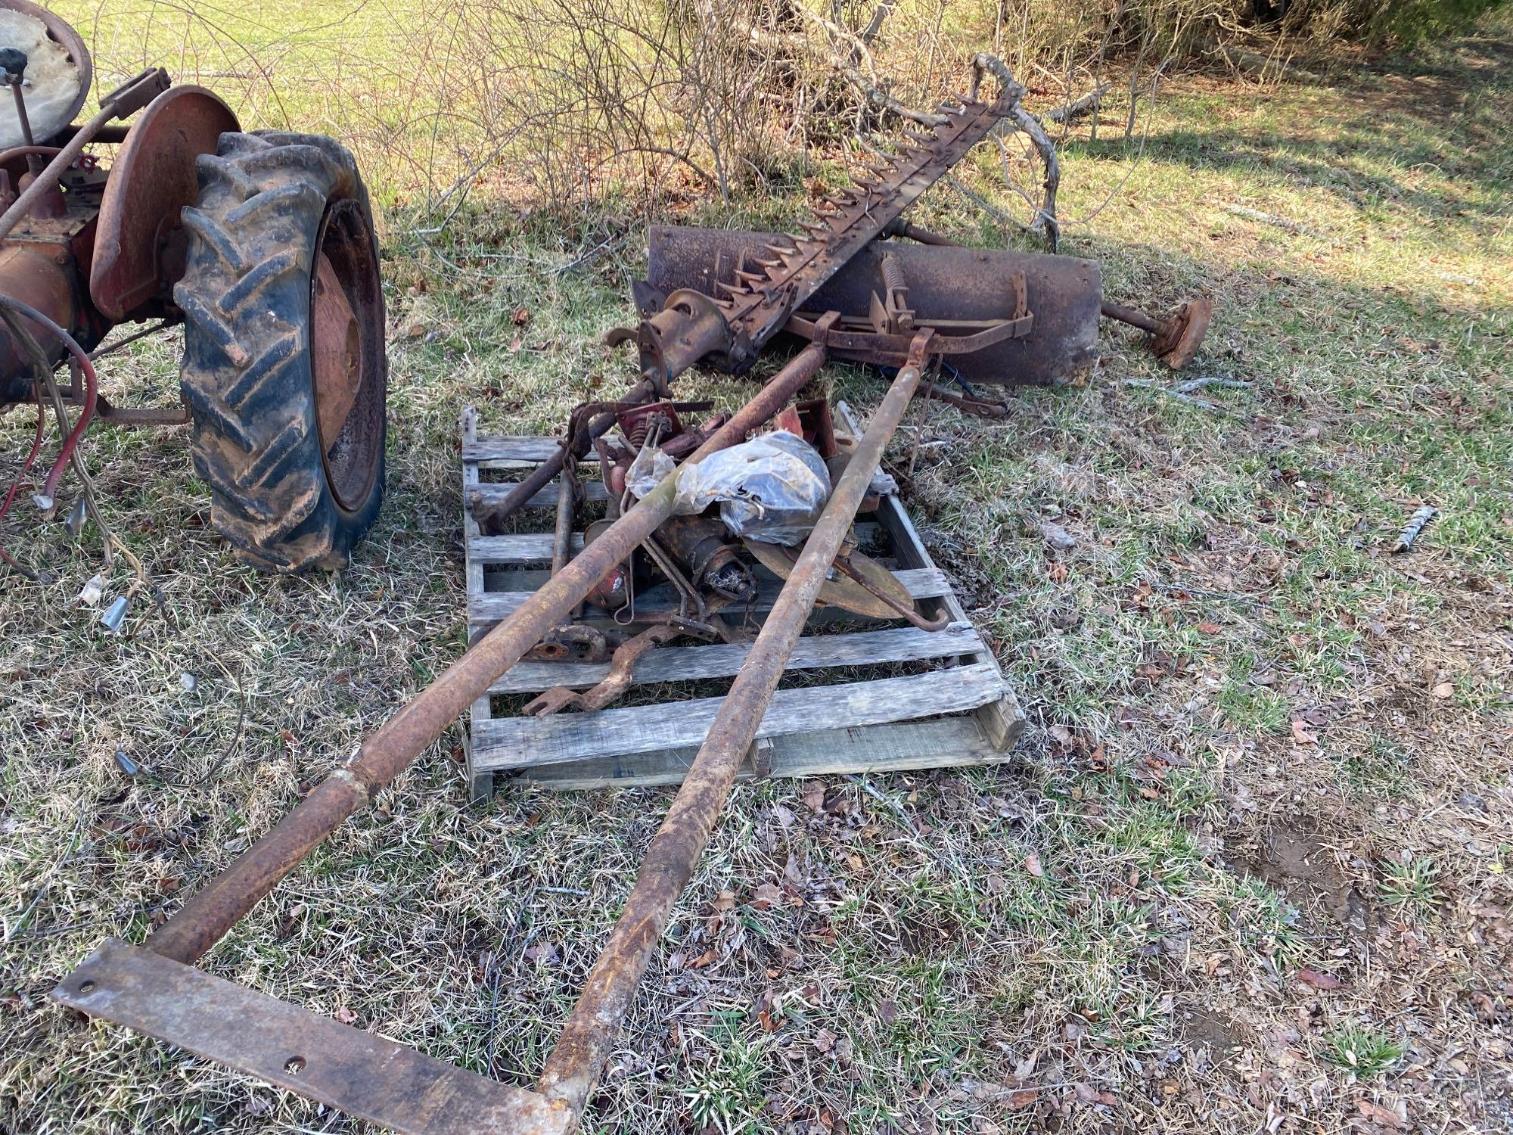 Image for Farmall Cub Tractor for Parts or Restoration, Blade, Mower,Misc Parts